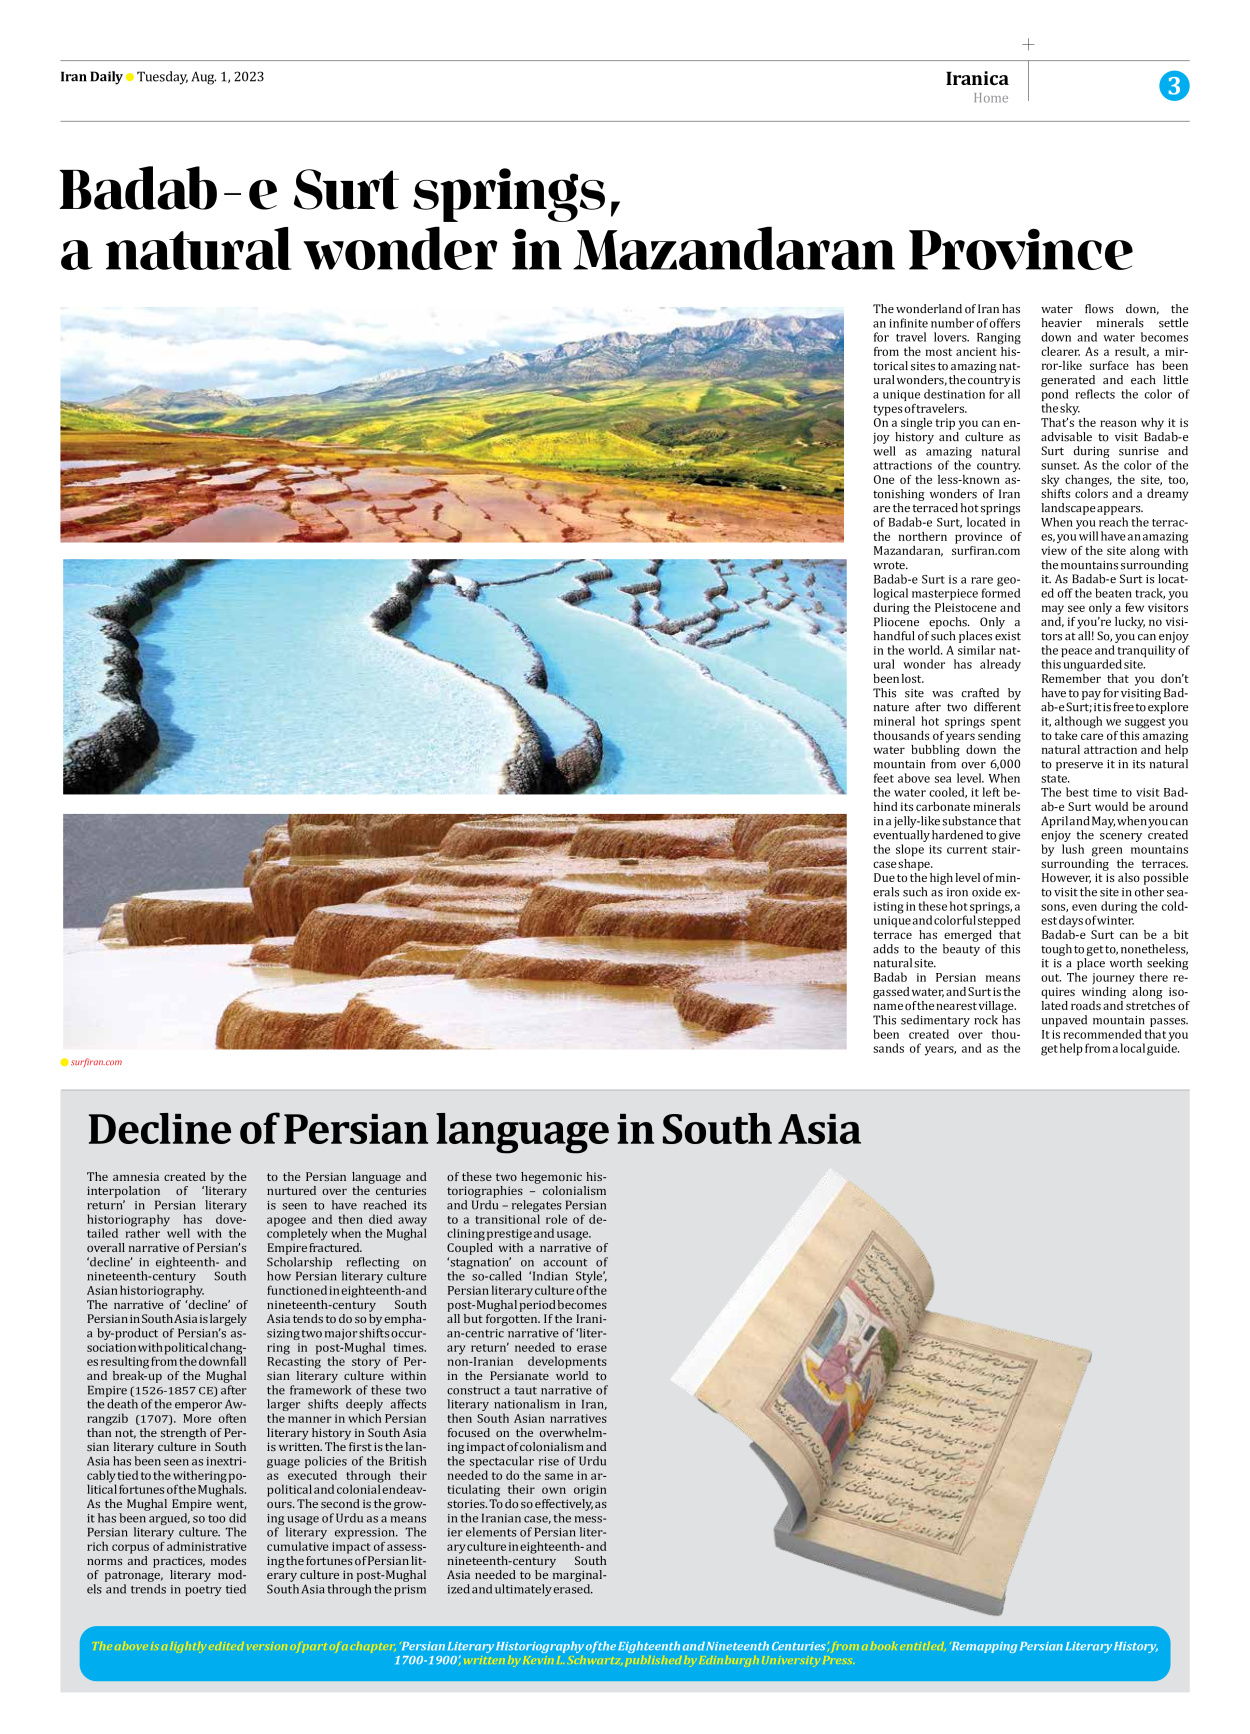 Iran Daily - Number Seven Thousand Three Hundred and Fifty Three - 01 August 2023 - Page 3